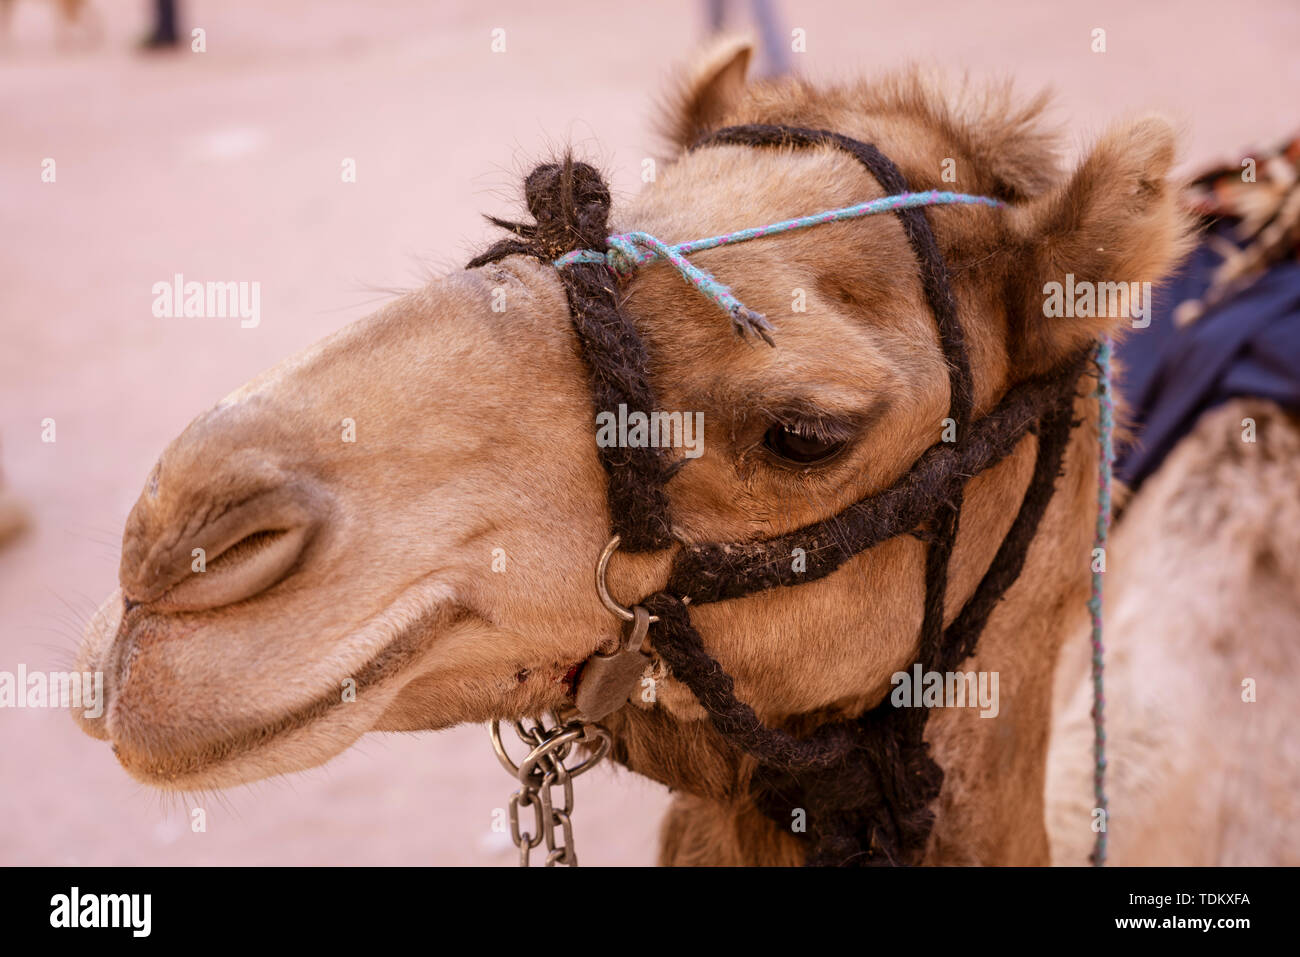 Camel Face Close-up in Three Quarter Profile Ready For Riding. Stock Photo